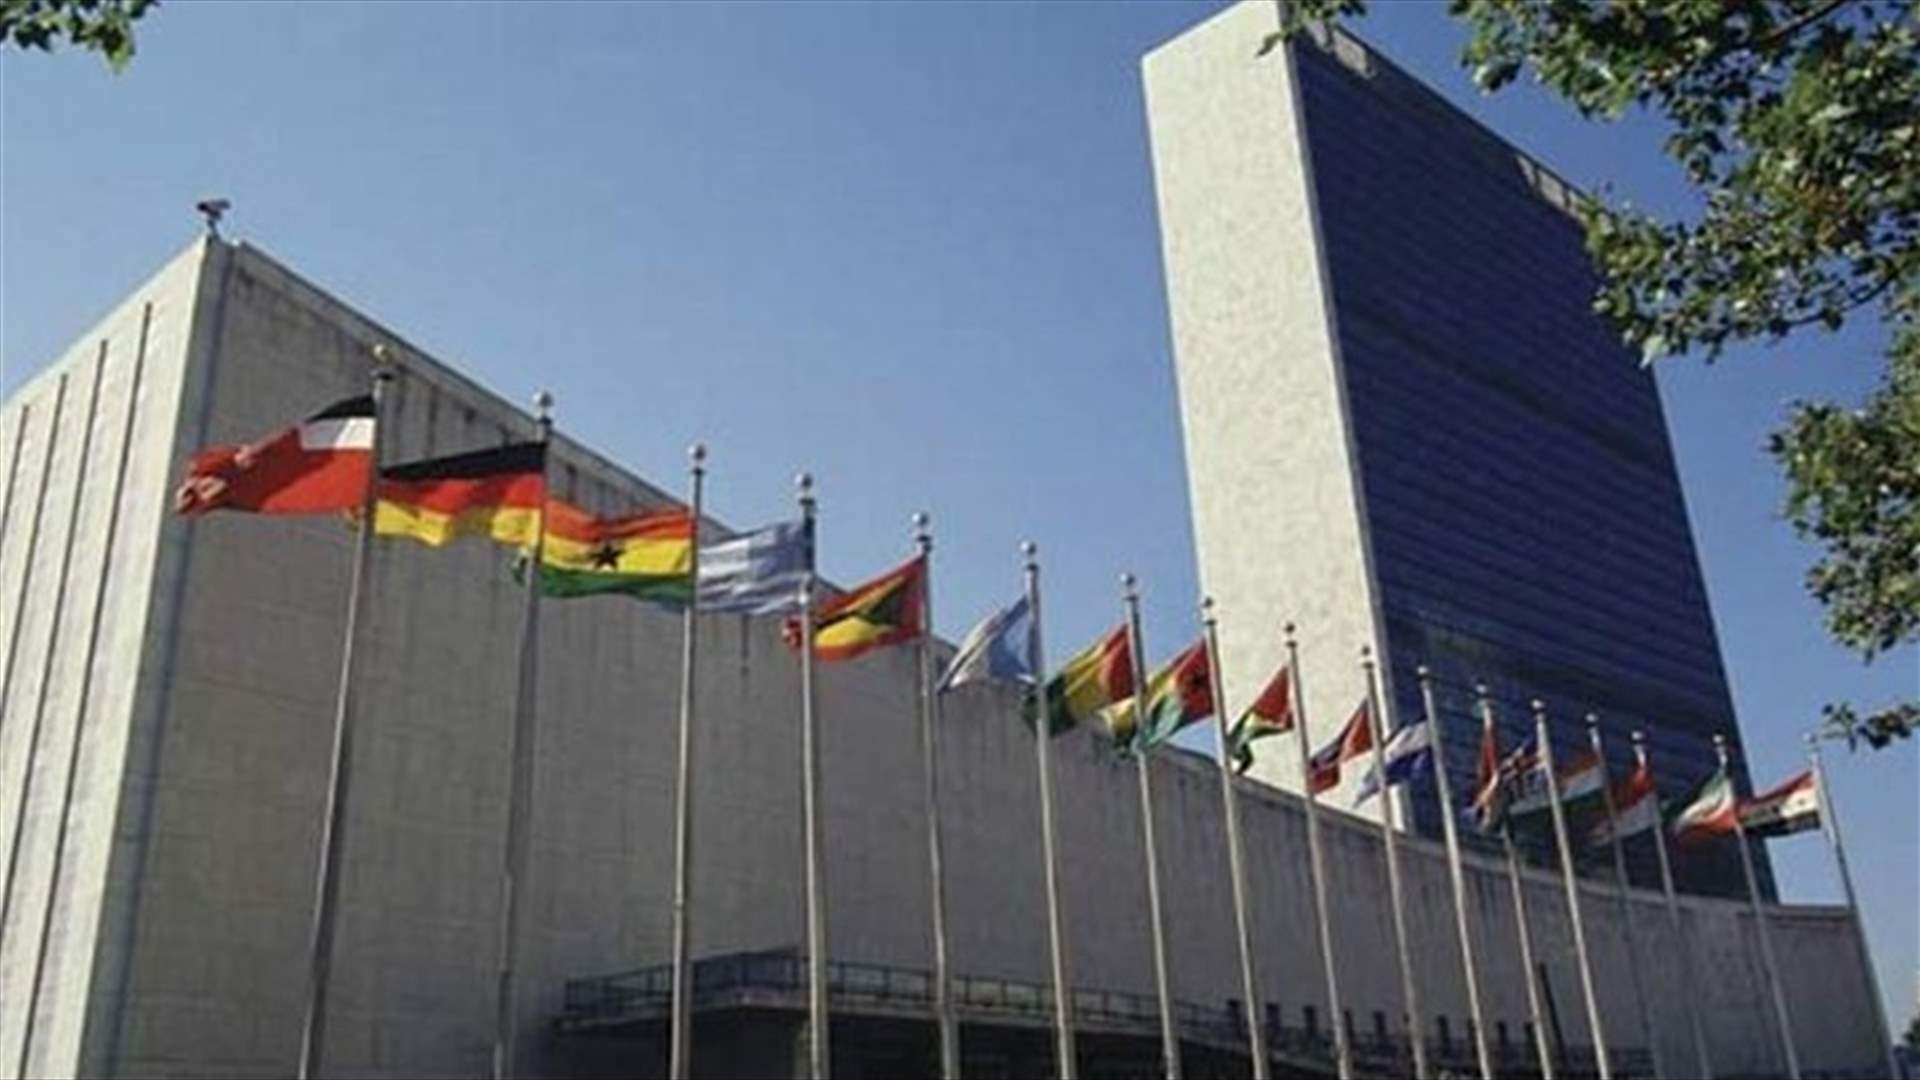 UN Security Council condemns attempts to threaten Lebanon’s security and stability 